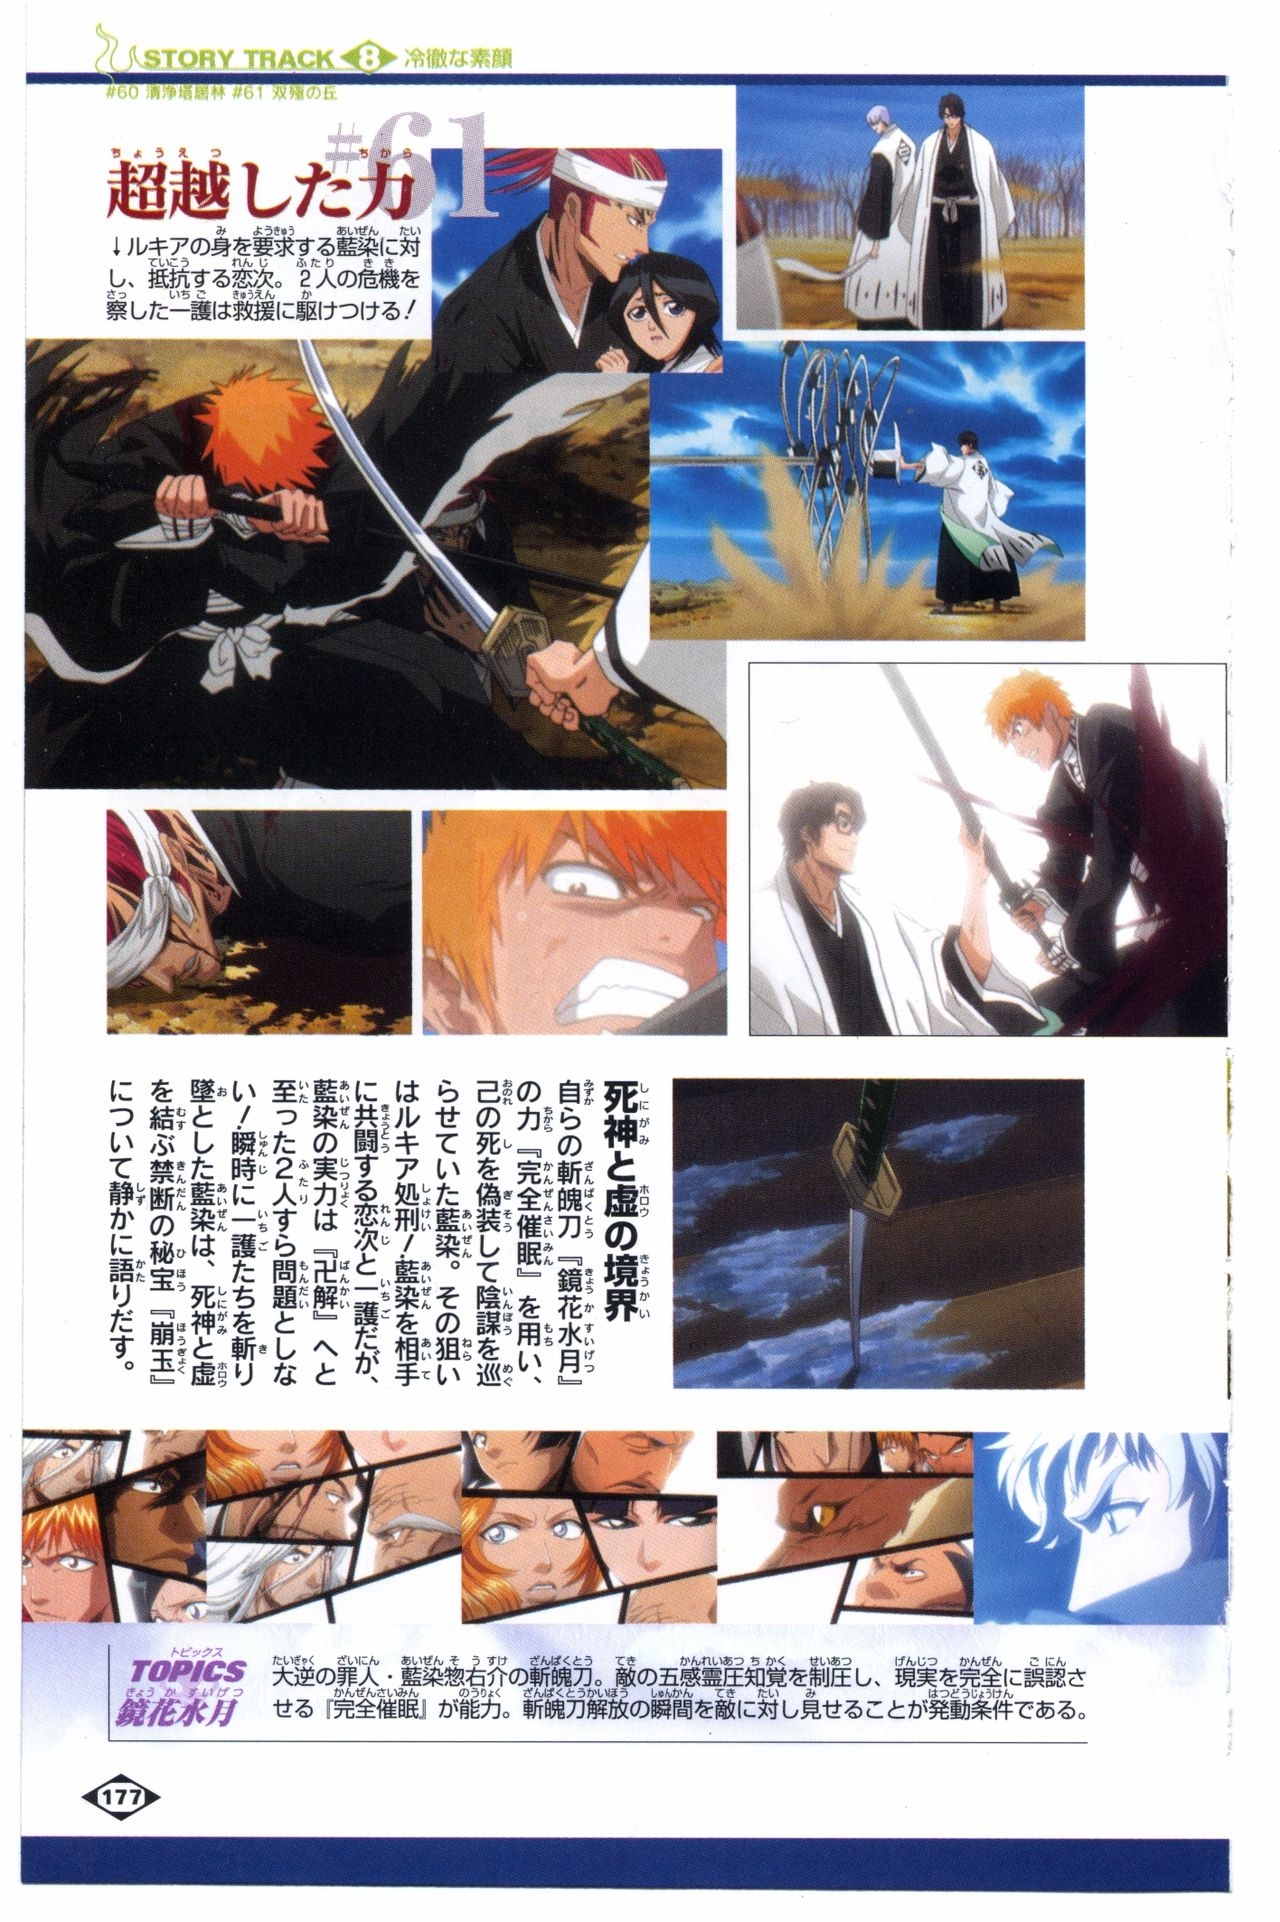 Bleach: Official Animation Book VIBEs 177